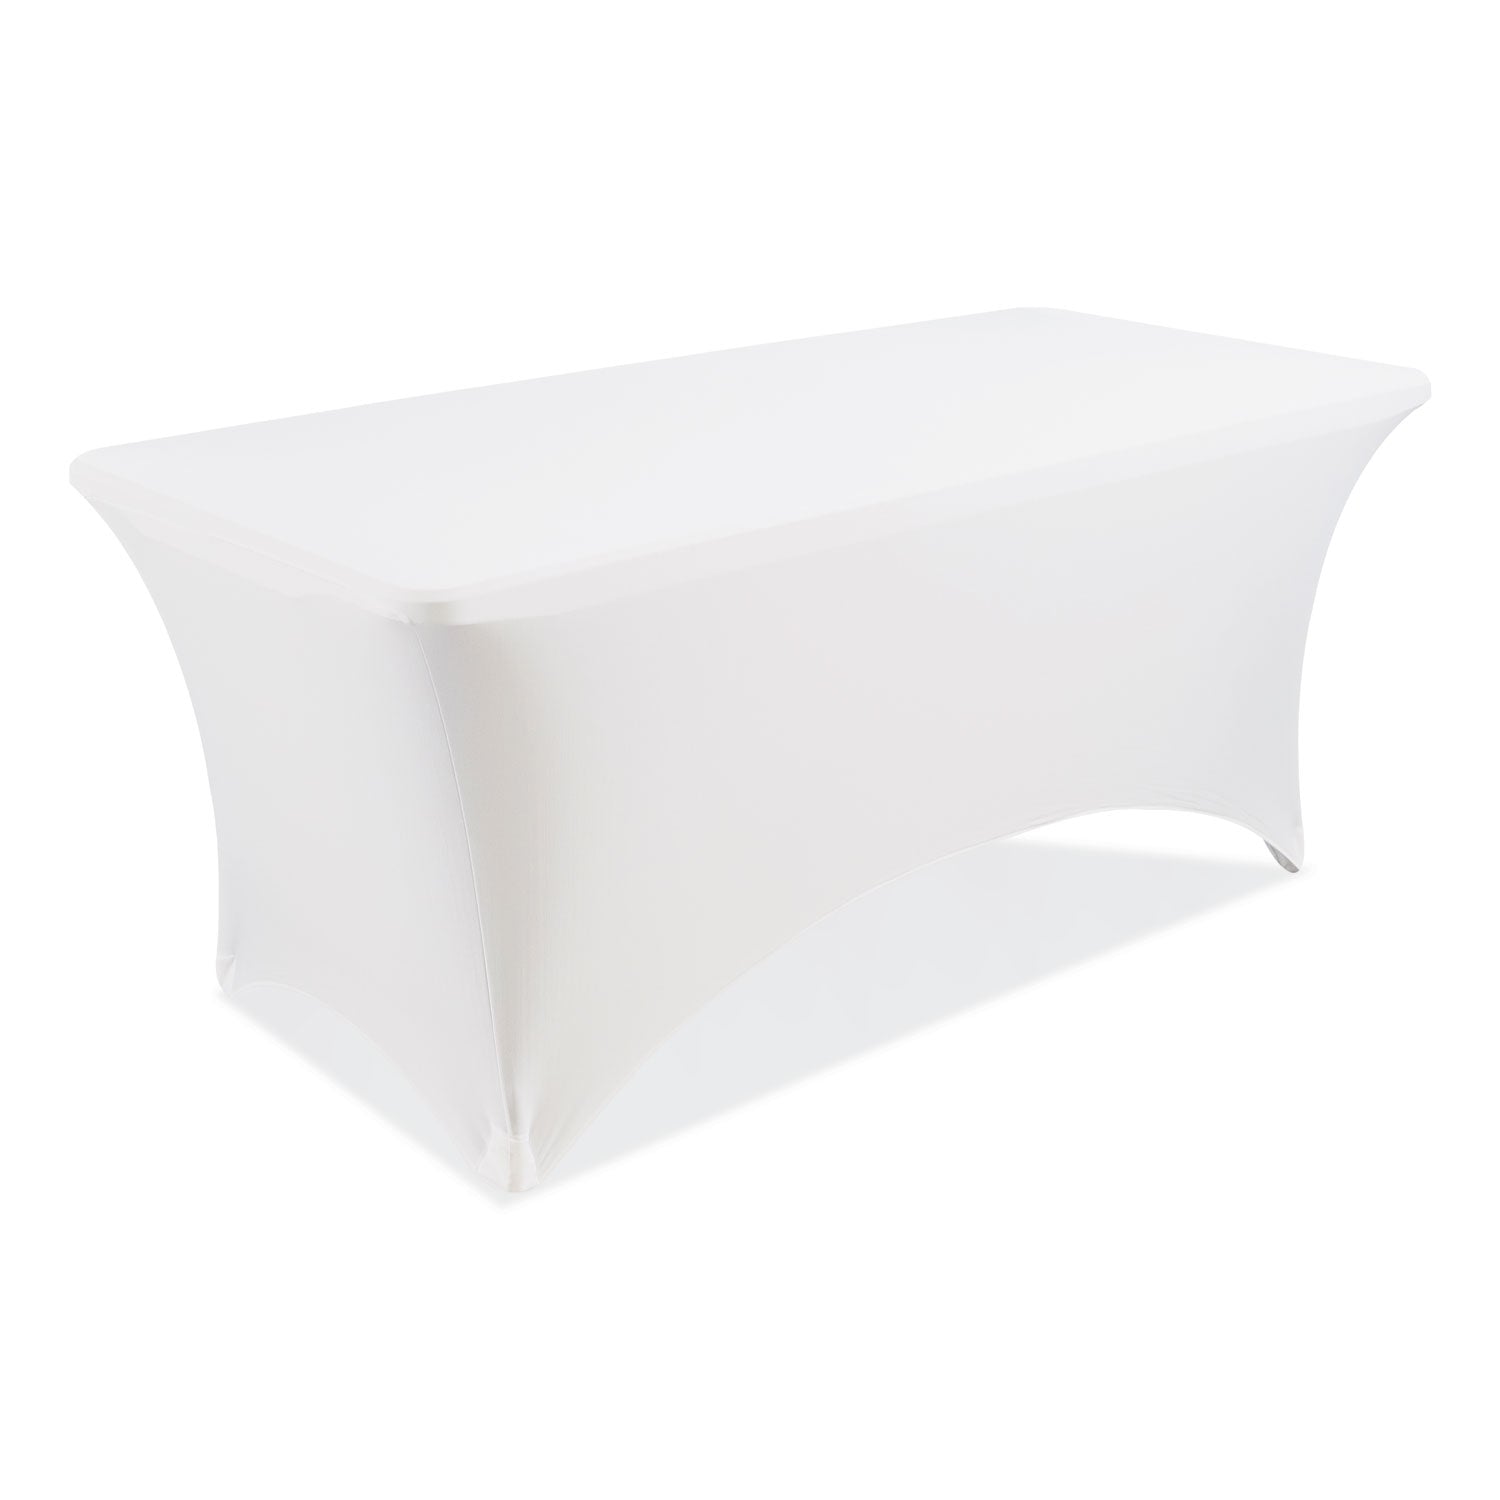 igear-fabric-table-cover-polyester-30-x-72-white_ice16523 - 2